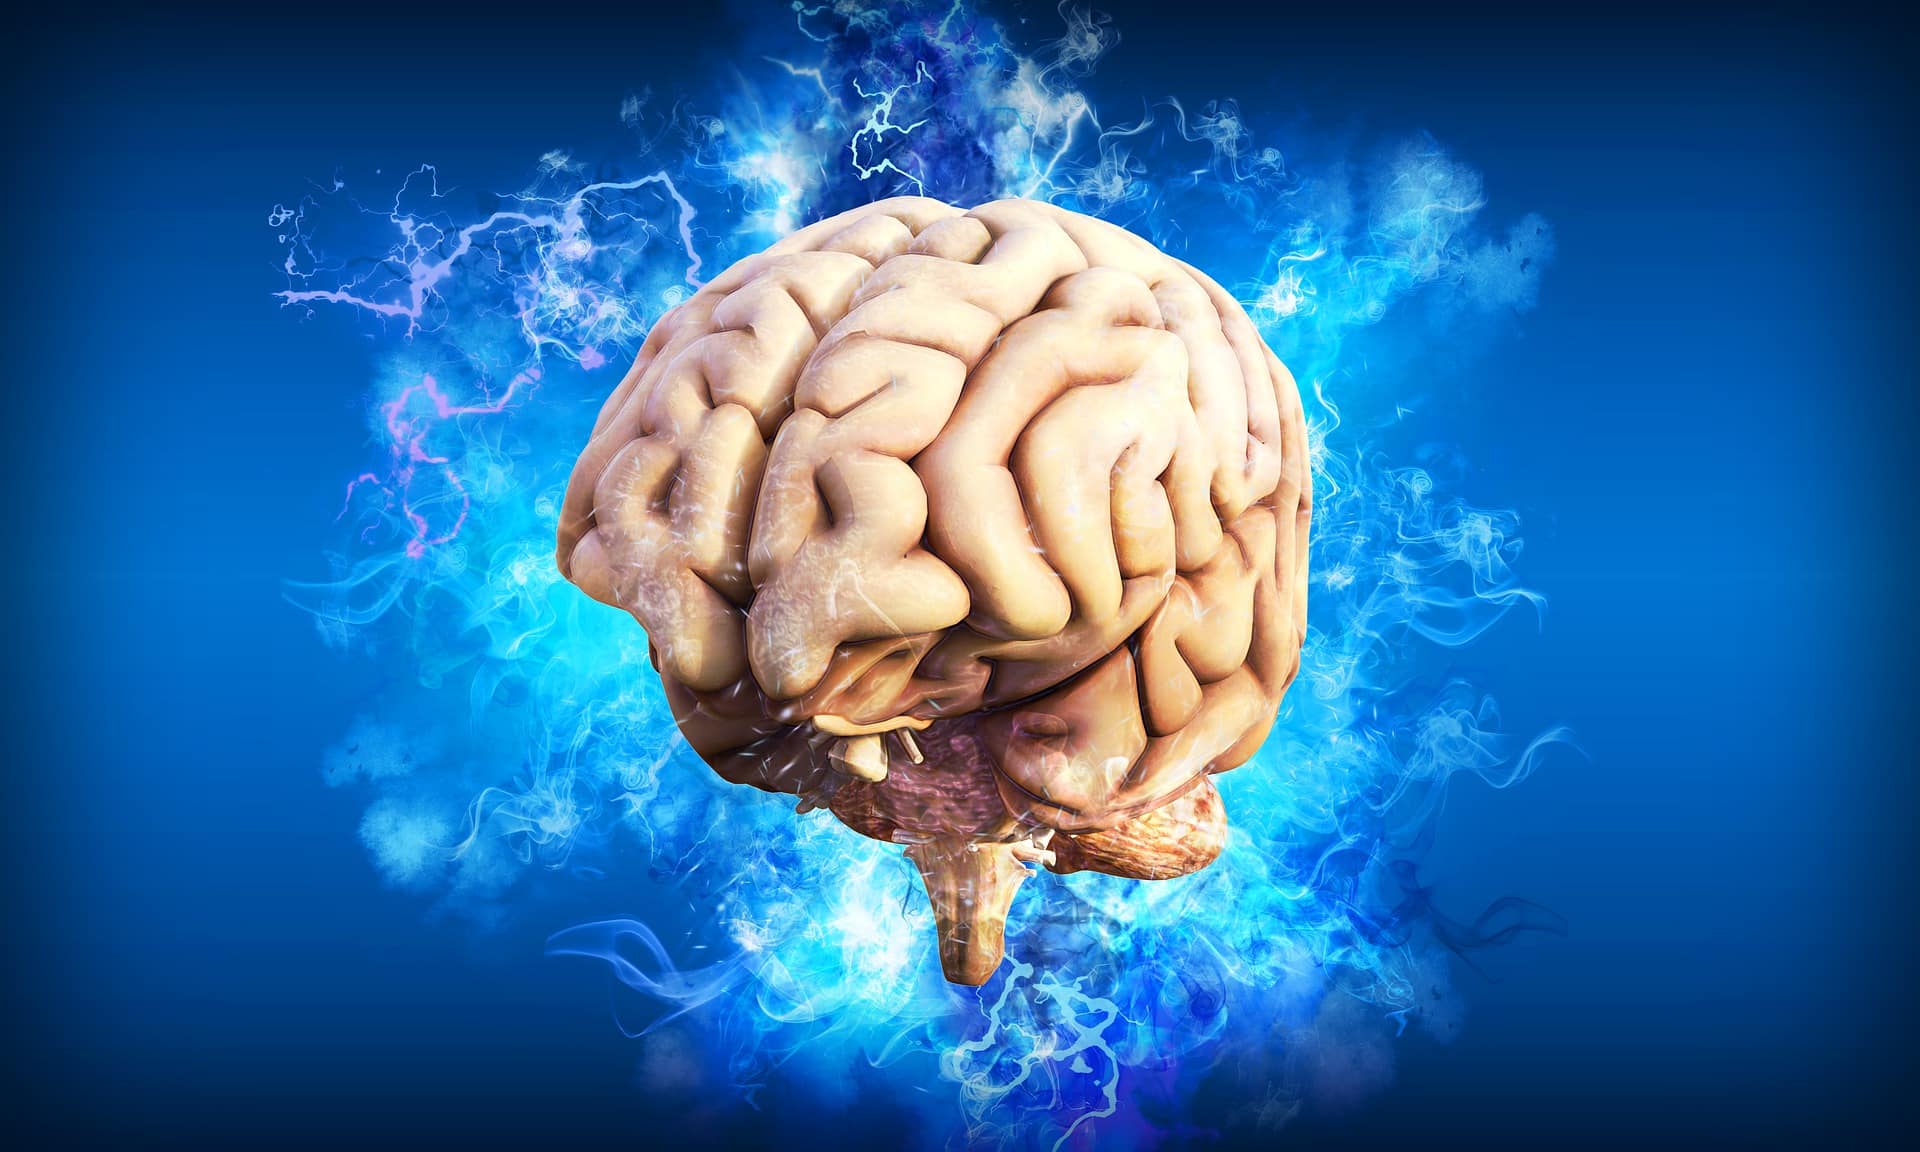 How To Boost Brain Power Naturally